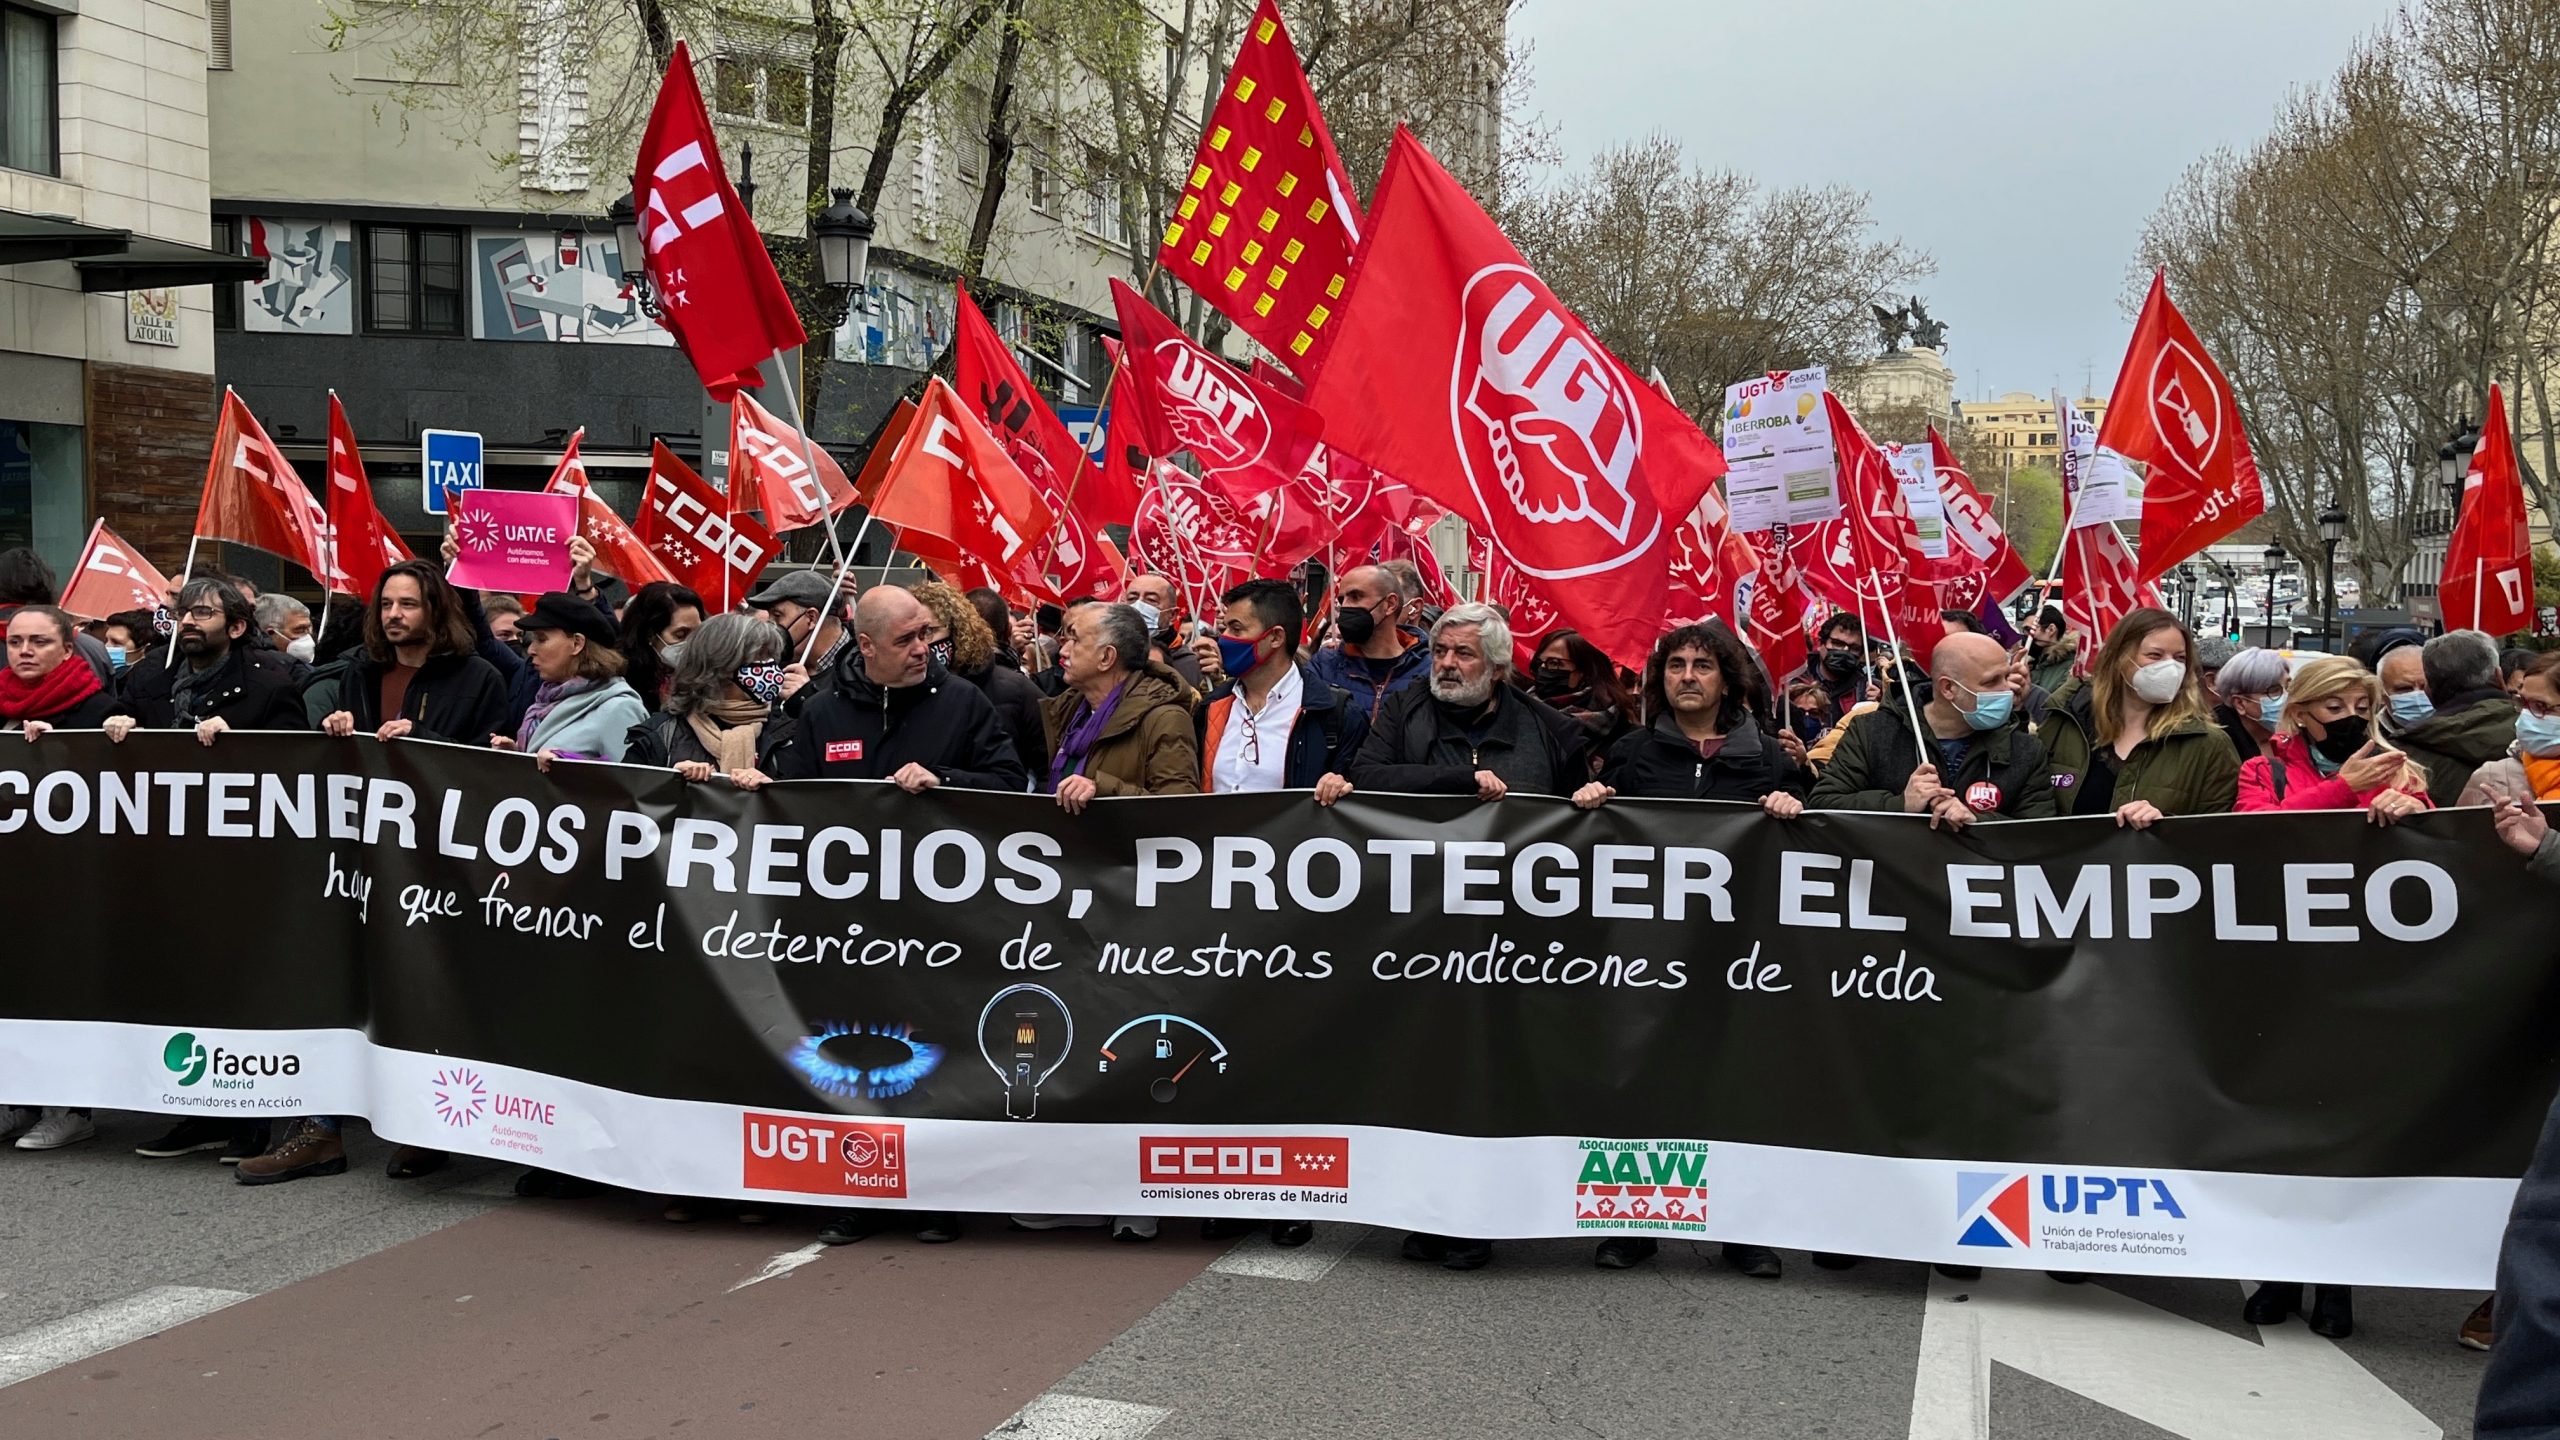 Workers Protest - Spain